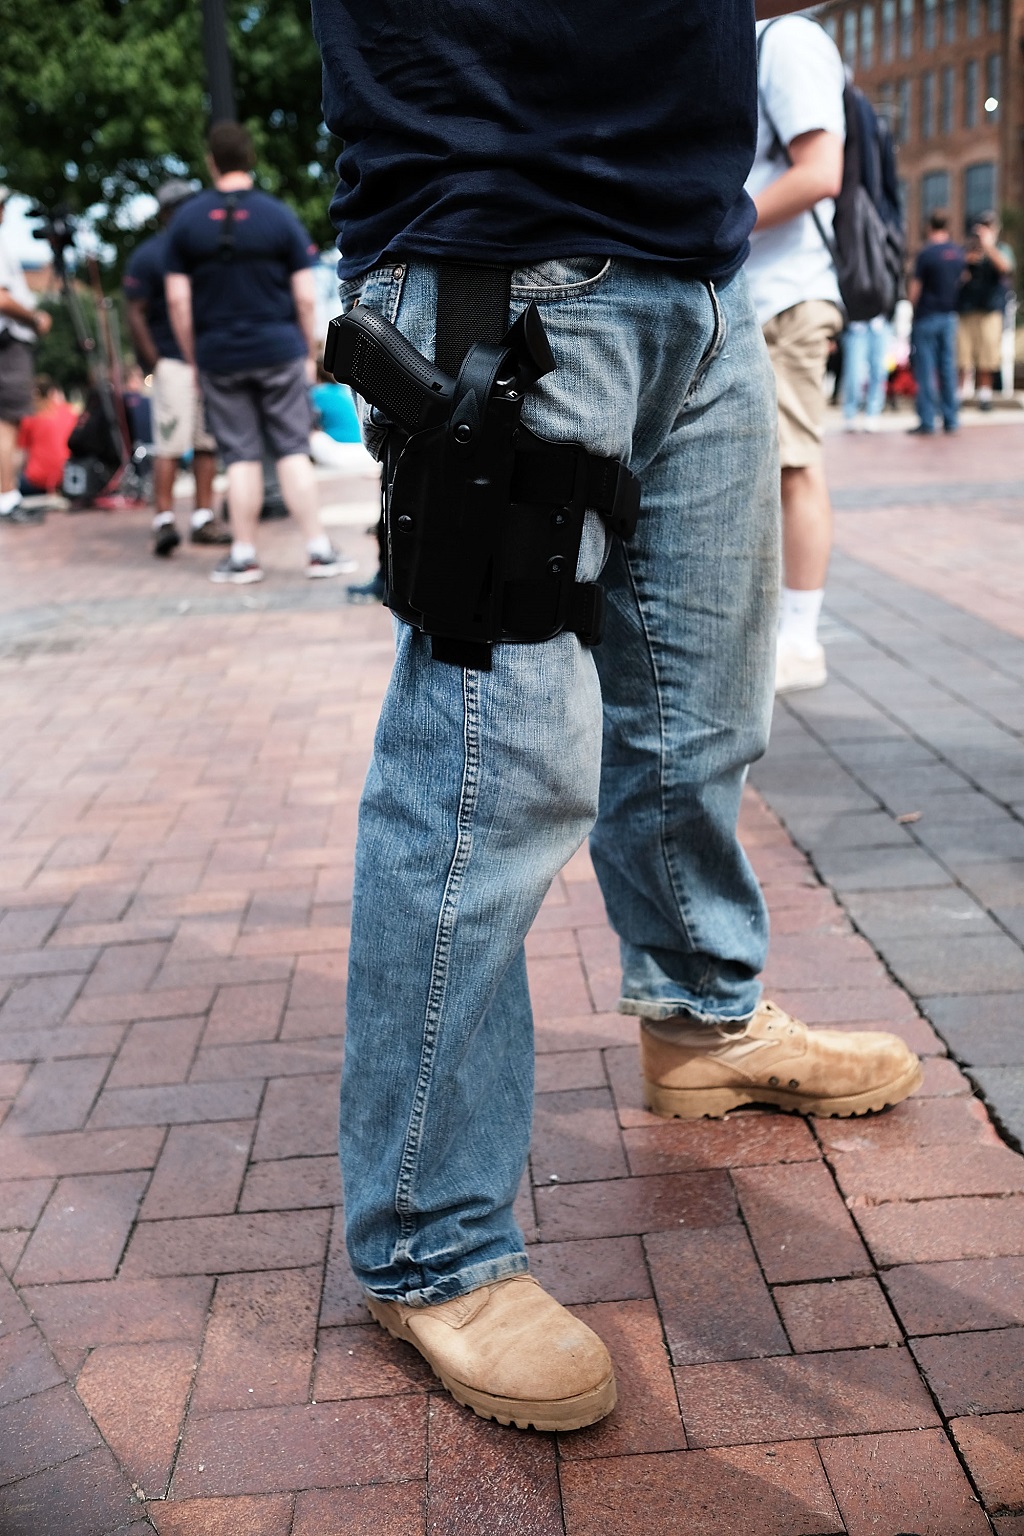 CLEVELAND, OH - JULY 18: A Trump supporter attends a rally with his pistol in downtown Cleveland in the first day of the Republican National Convention (RNC) on July 18, 2016 in Cleveland, Ohio. An estimated 50,000 people are expected in Cleveland, including hundreds of protesters and members of the media. The convention runs through July 21. Spencer Platt/Getty Images/AFP / AFP PHOTO / GETTY IMAGES NORTH AMERICA / SPENCER PLATT